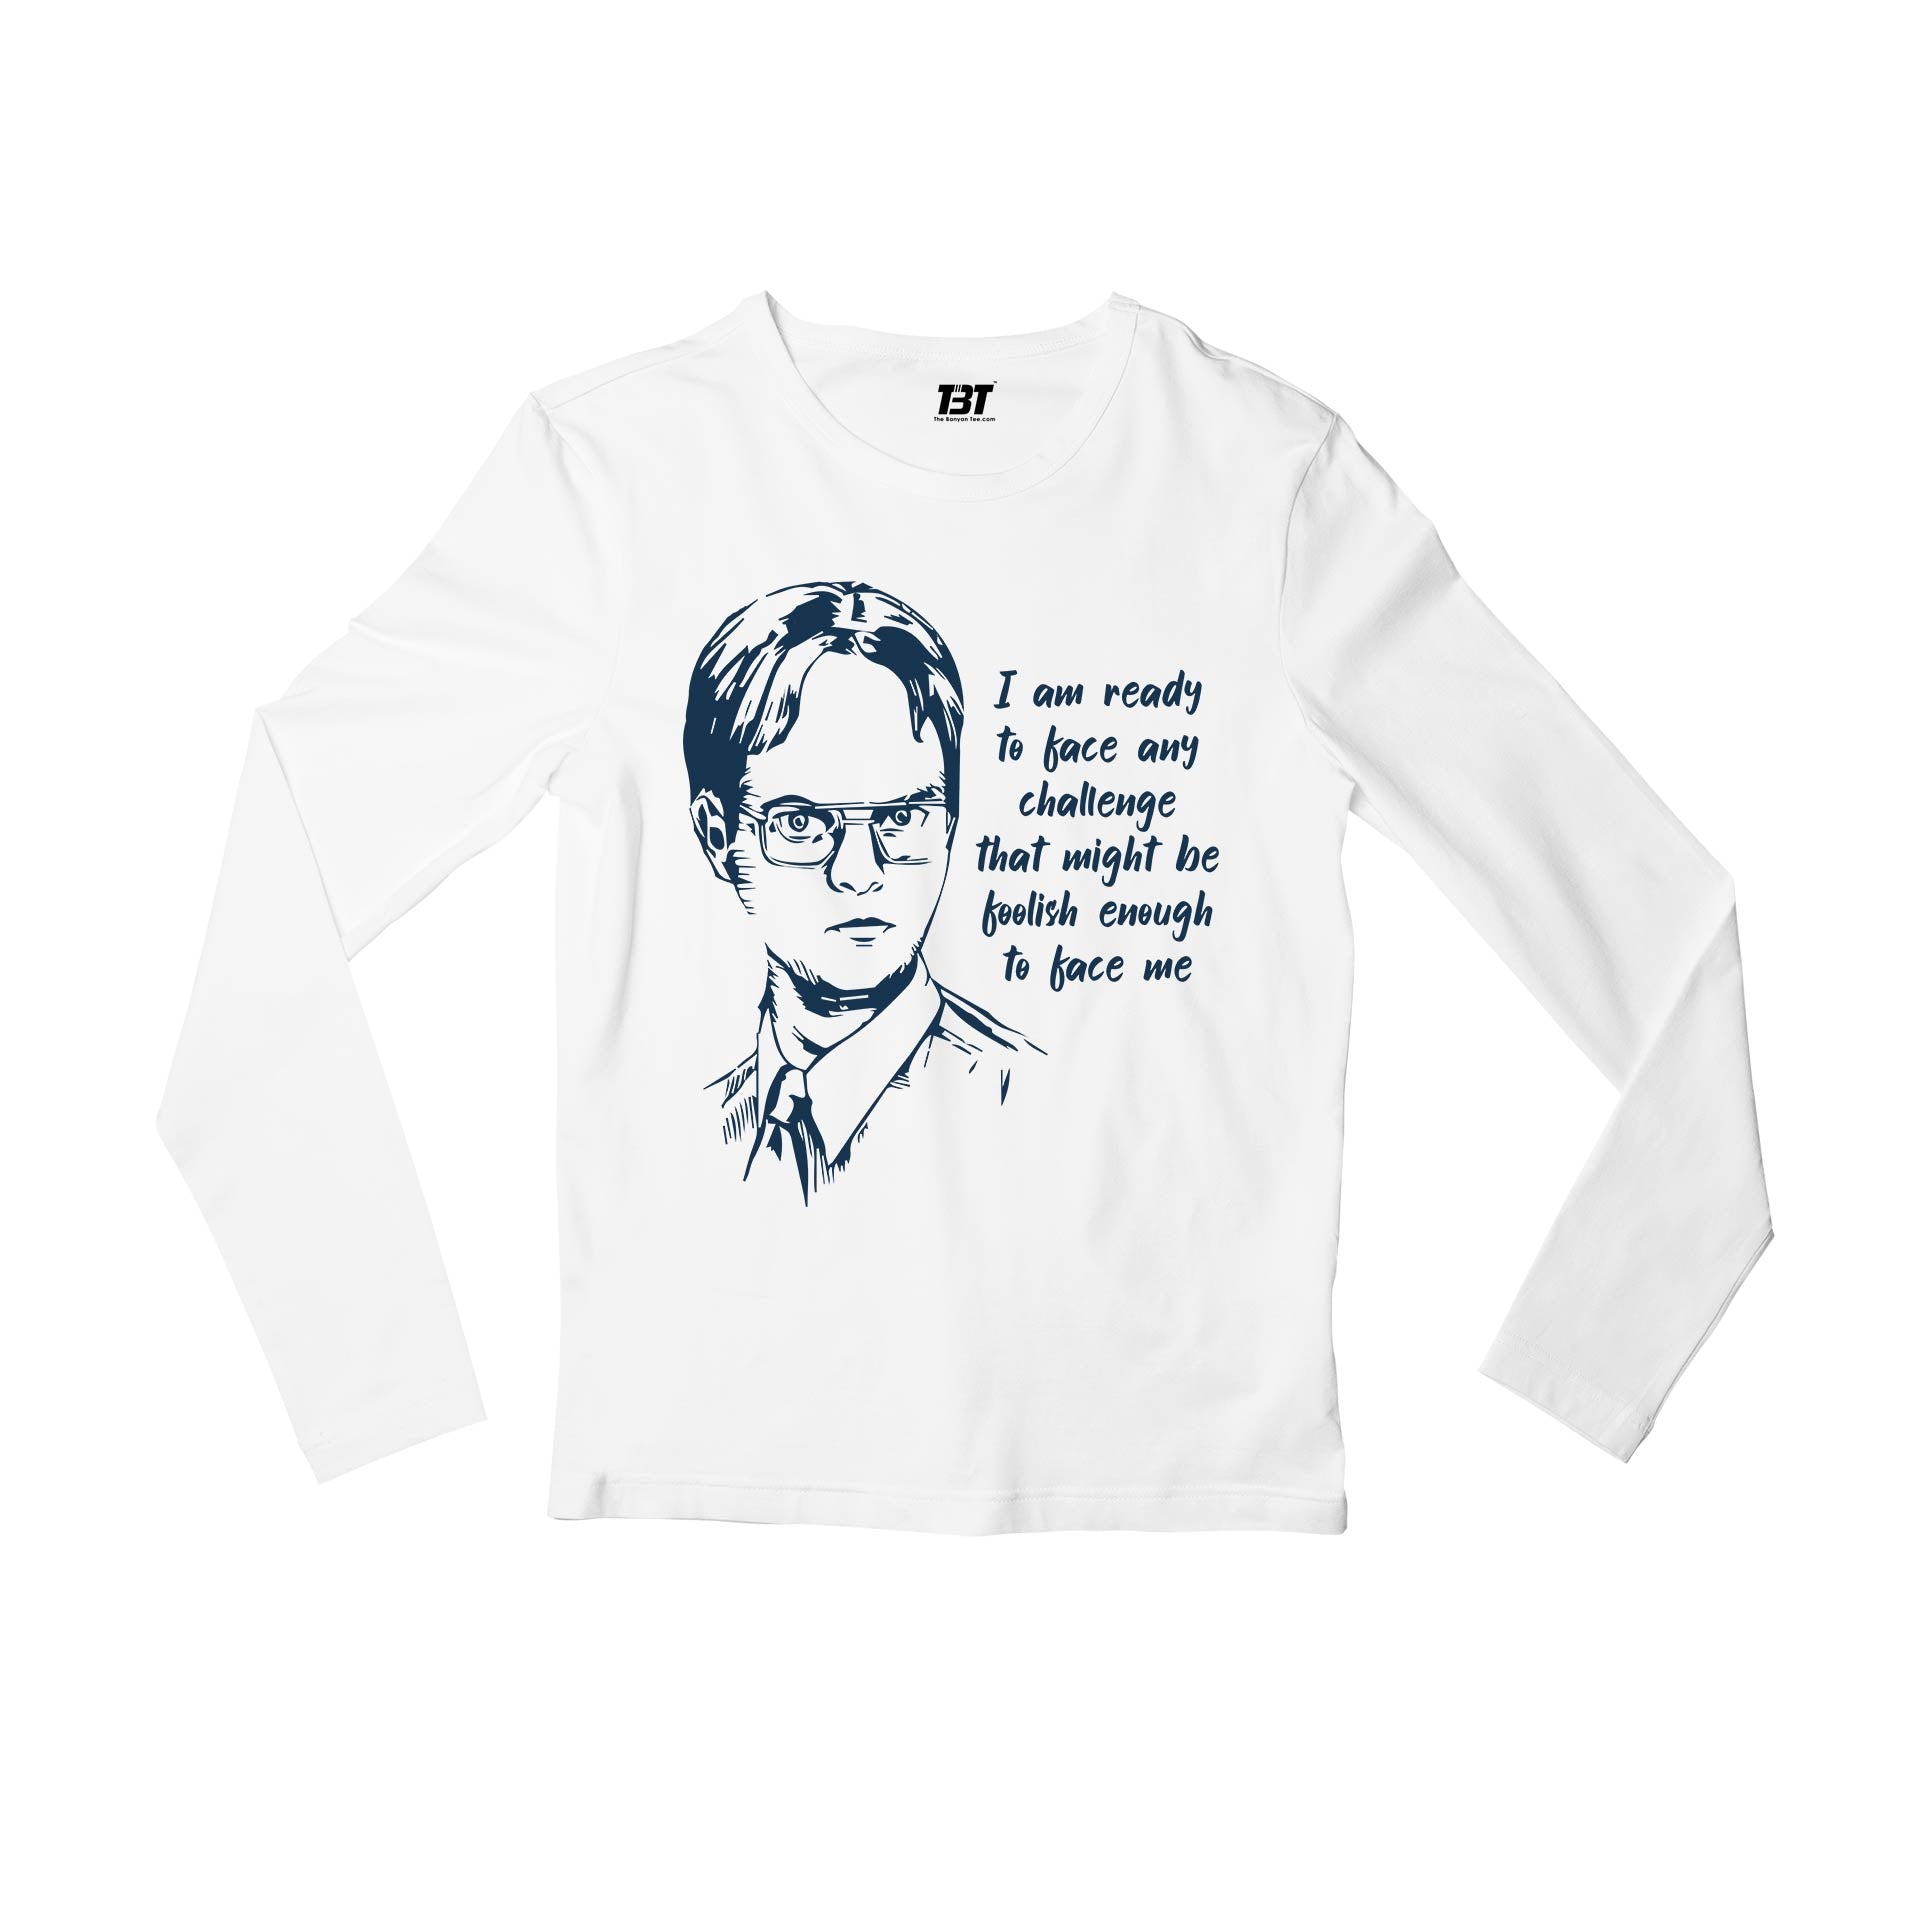 the office dwight full sleeves long sleeves tv & movies buy online india the banyan tee tbt men women girls boys unisex white - i am ready to face any challenge